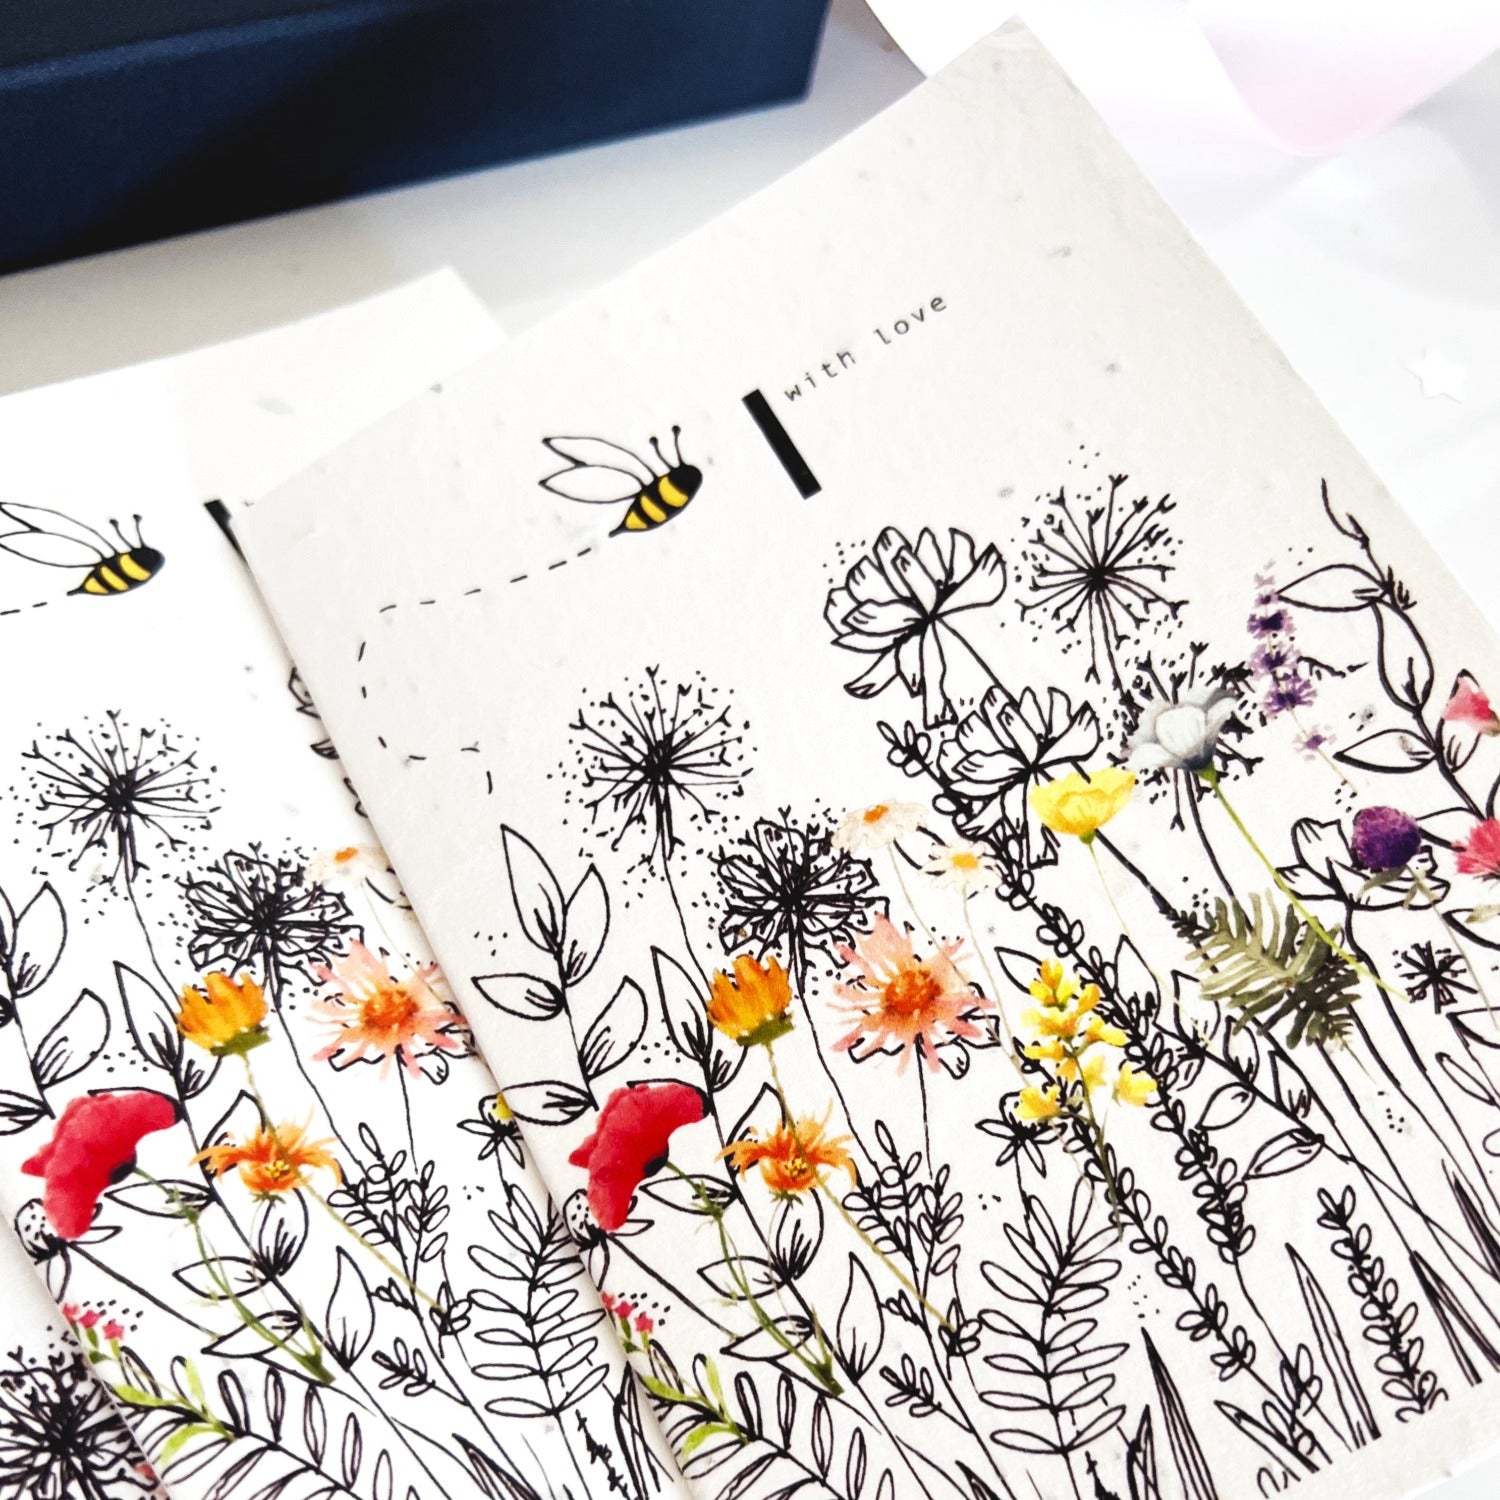 Plantable cards \ plantable birthday cards with wildflower meadow seeds that bees love - pack of 3 cards | The Luxe Co